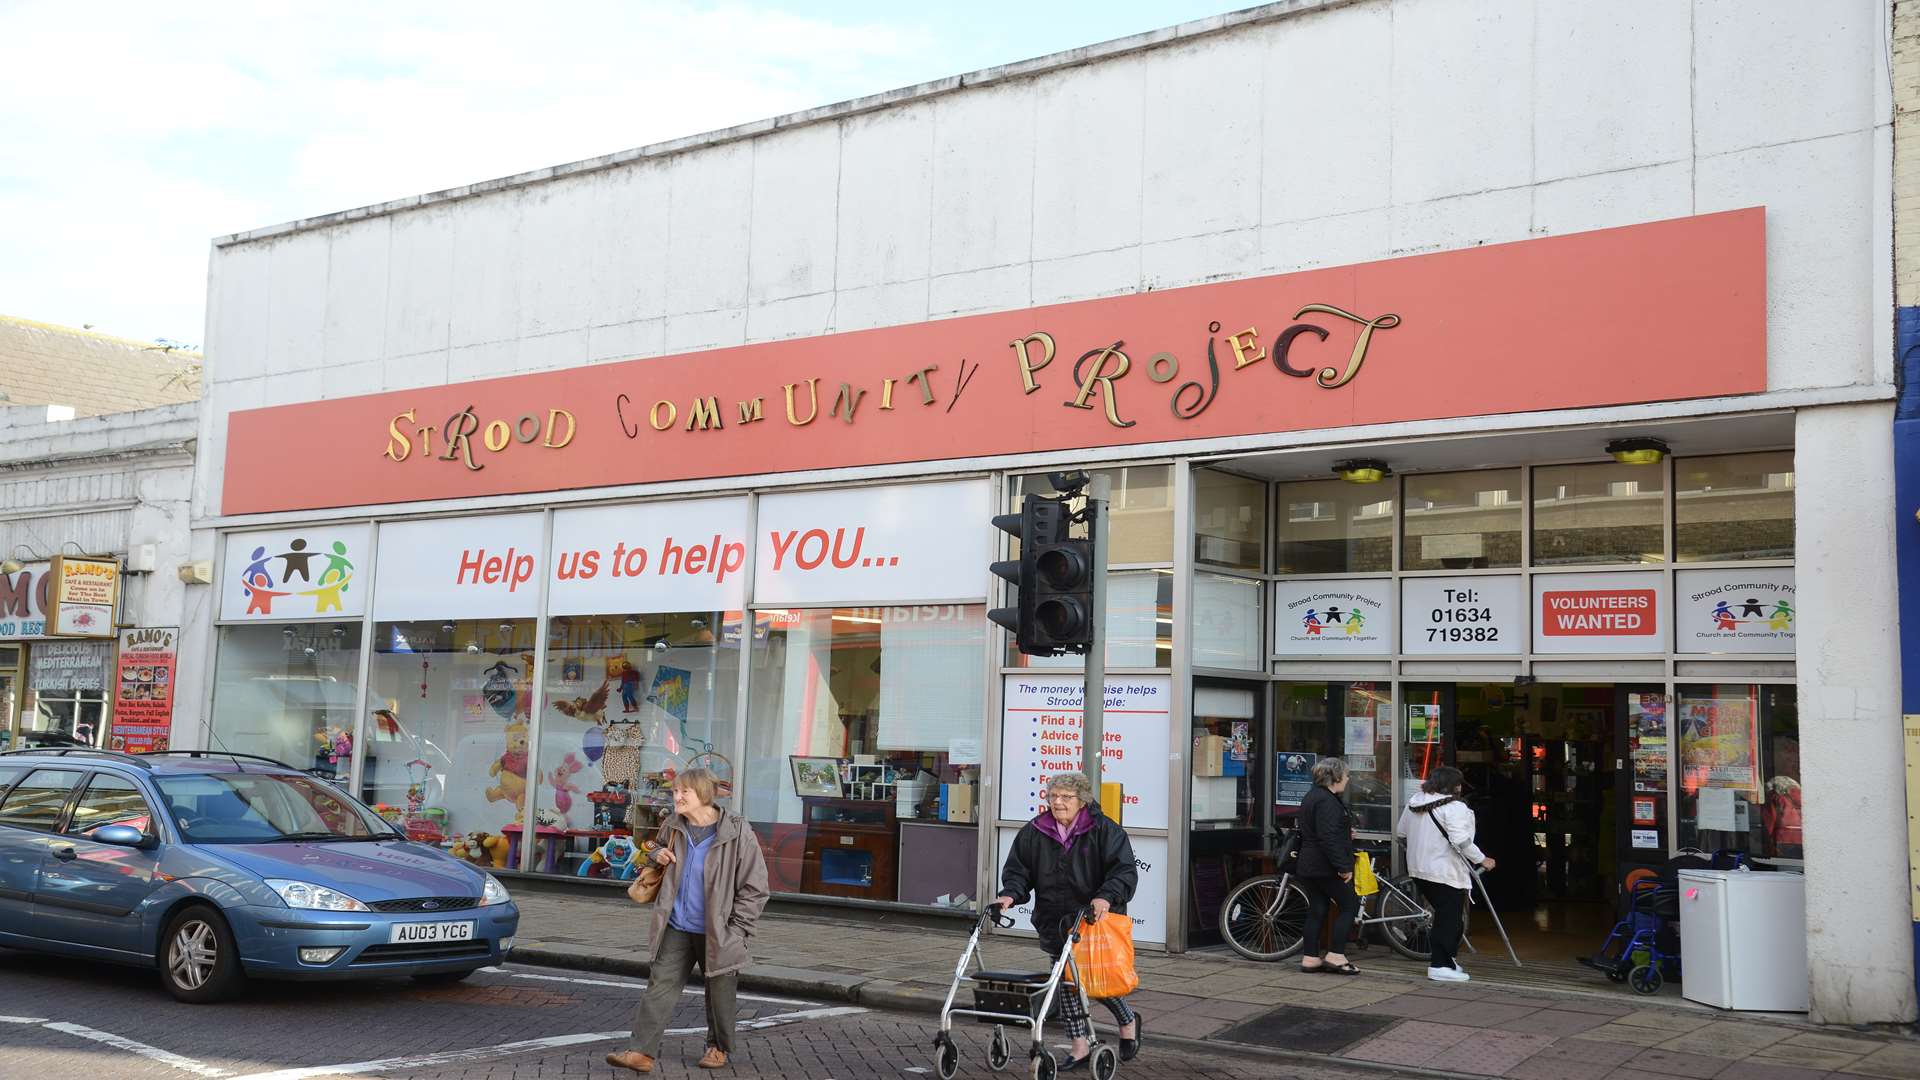 Strood Community Project, High Street, Strood